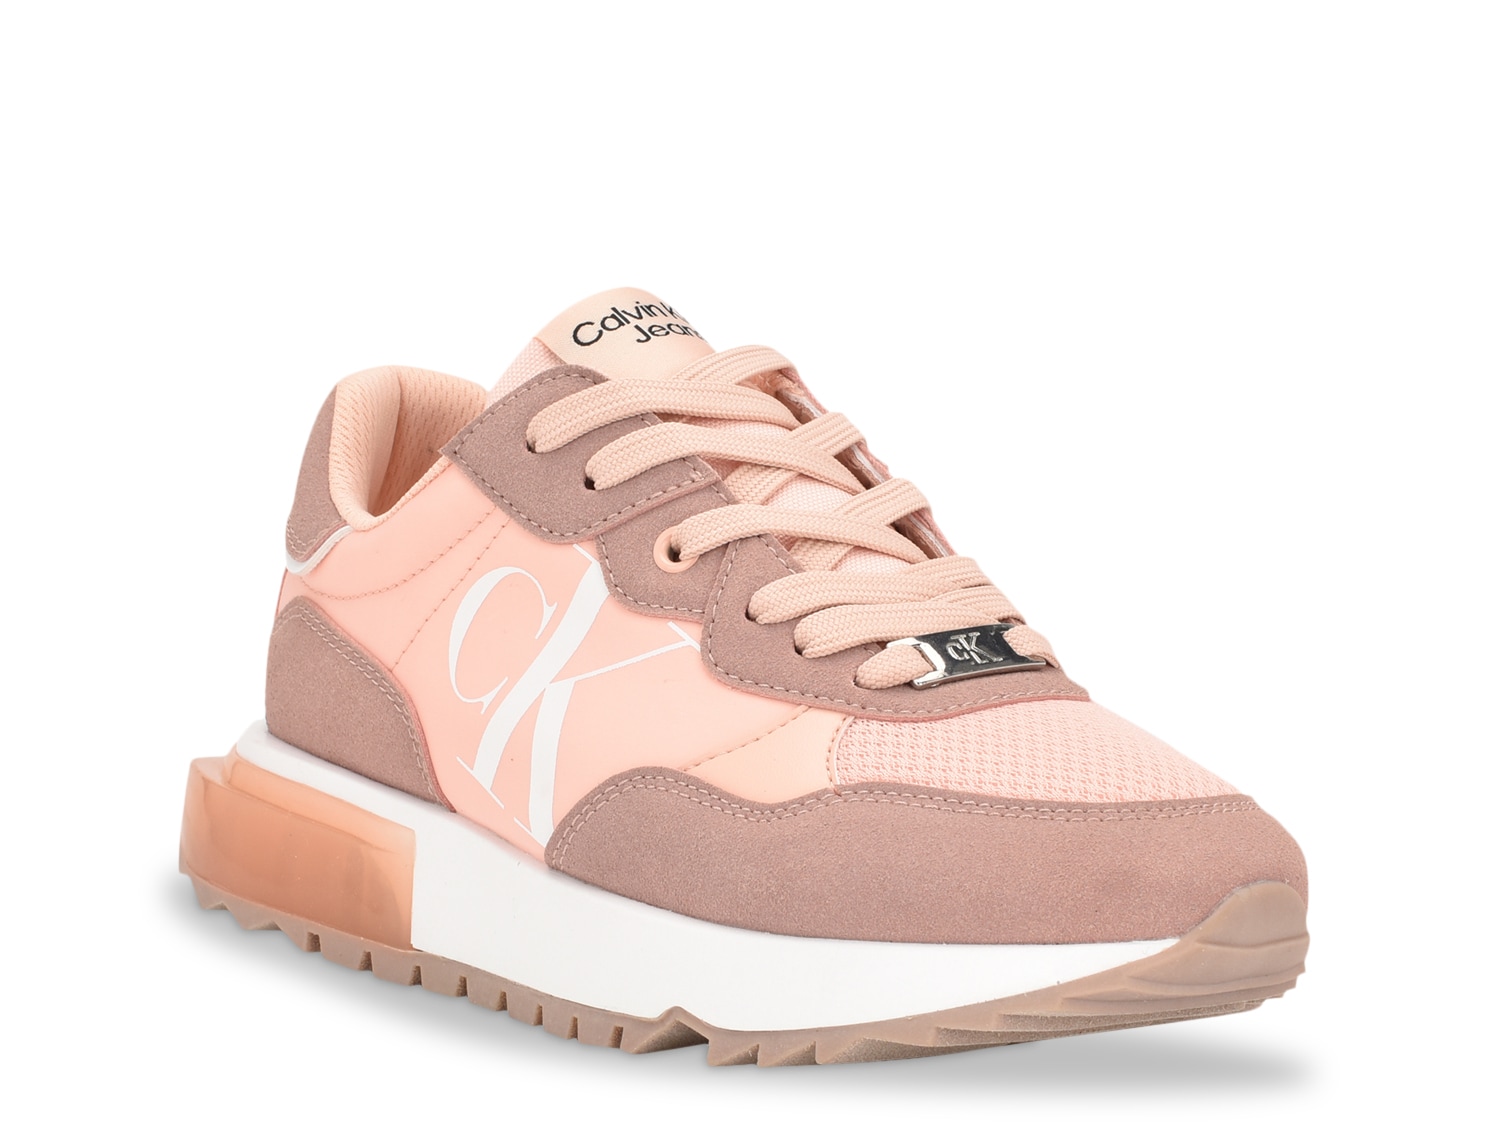 Shipping Free | DSW Sneaker - Magalee Klein Calvin